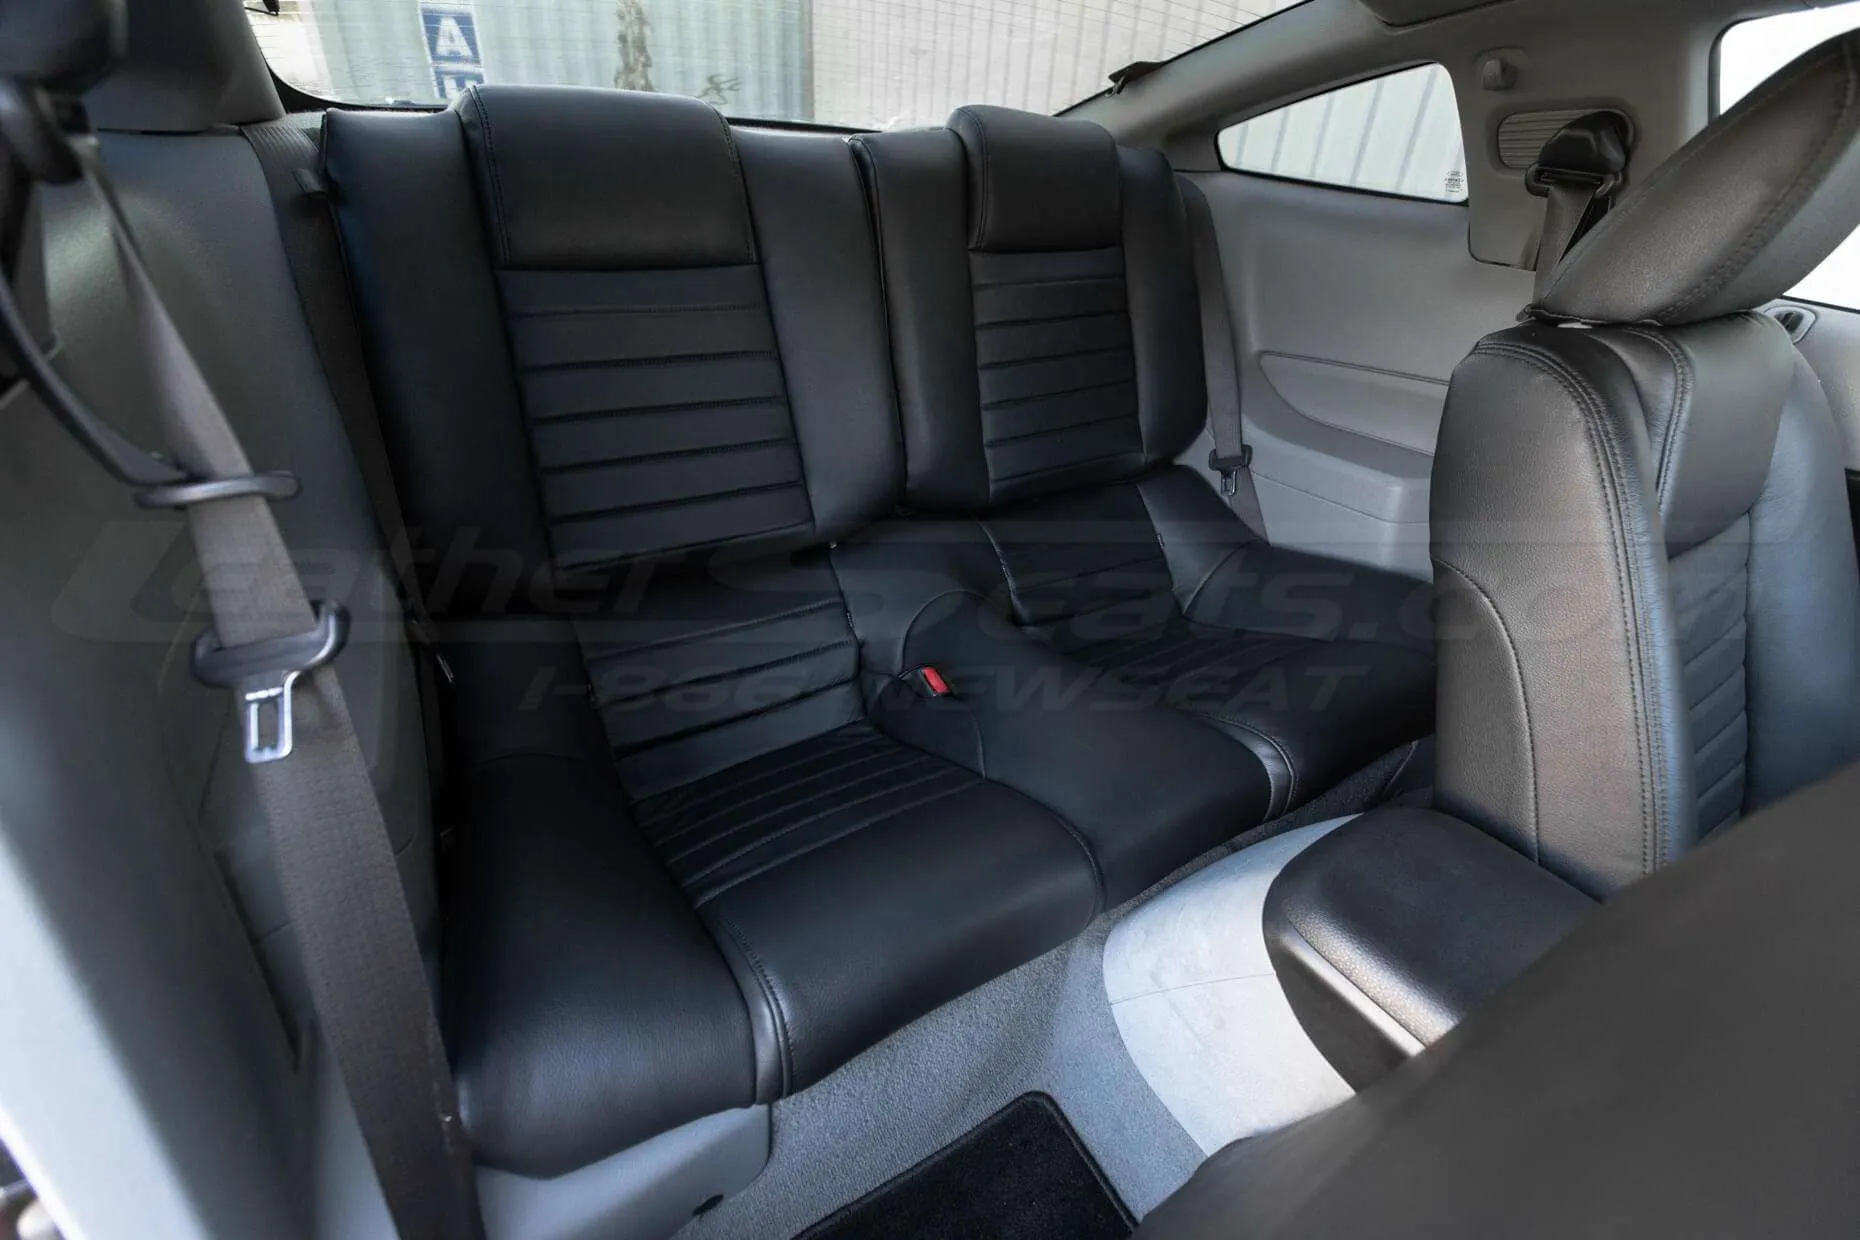 2005-2009 Ford Mustang Leather Seats - Black - Back seats - passenger side view